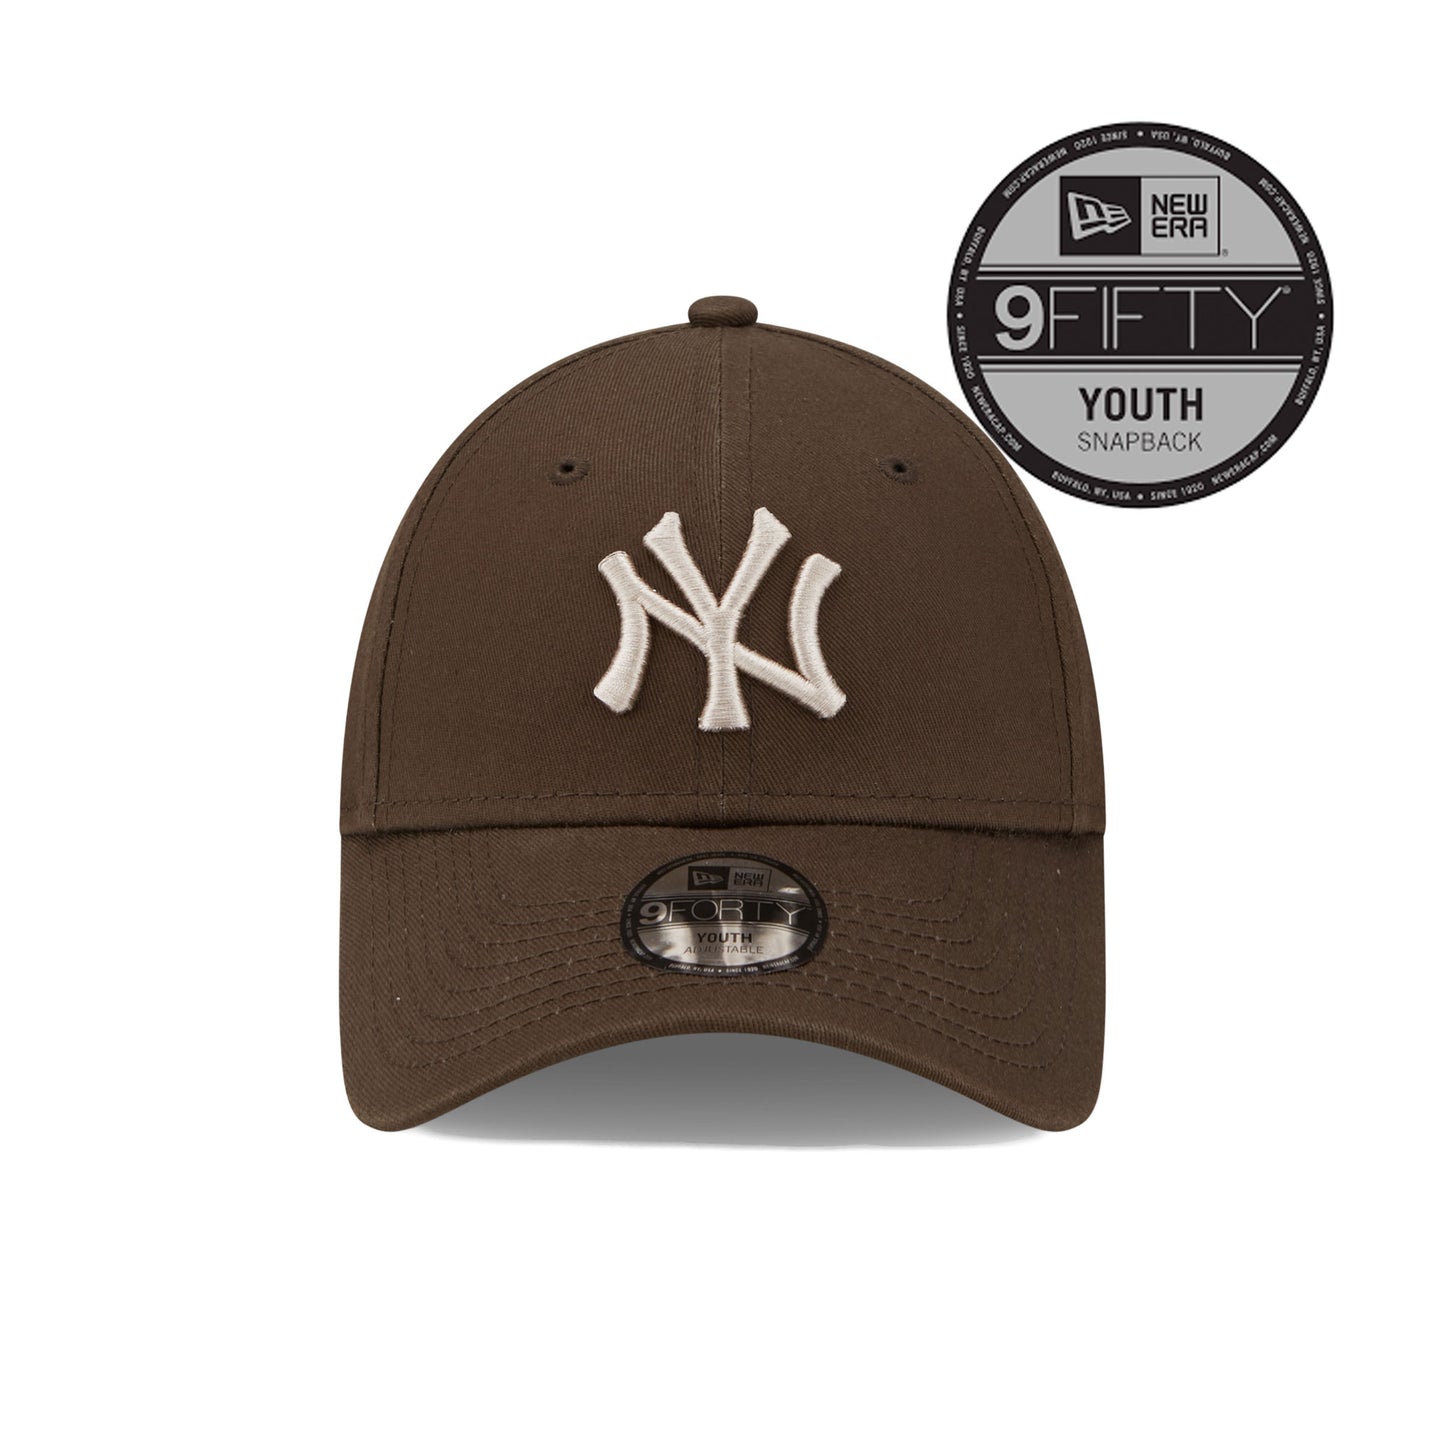 New York Yankees New Era 9FORTY YOUTH Strap back Cap brown